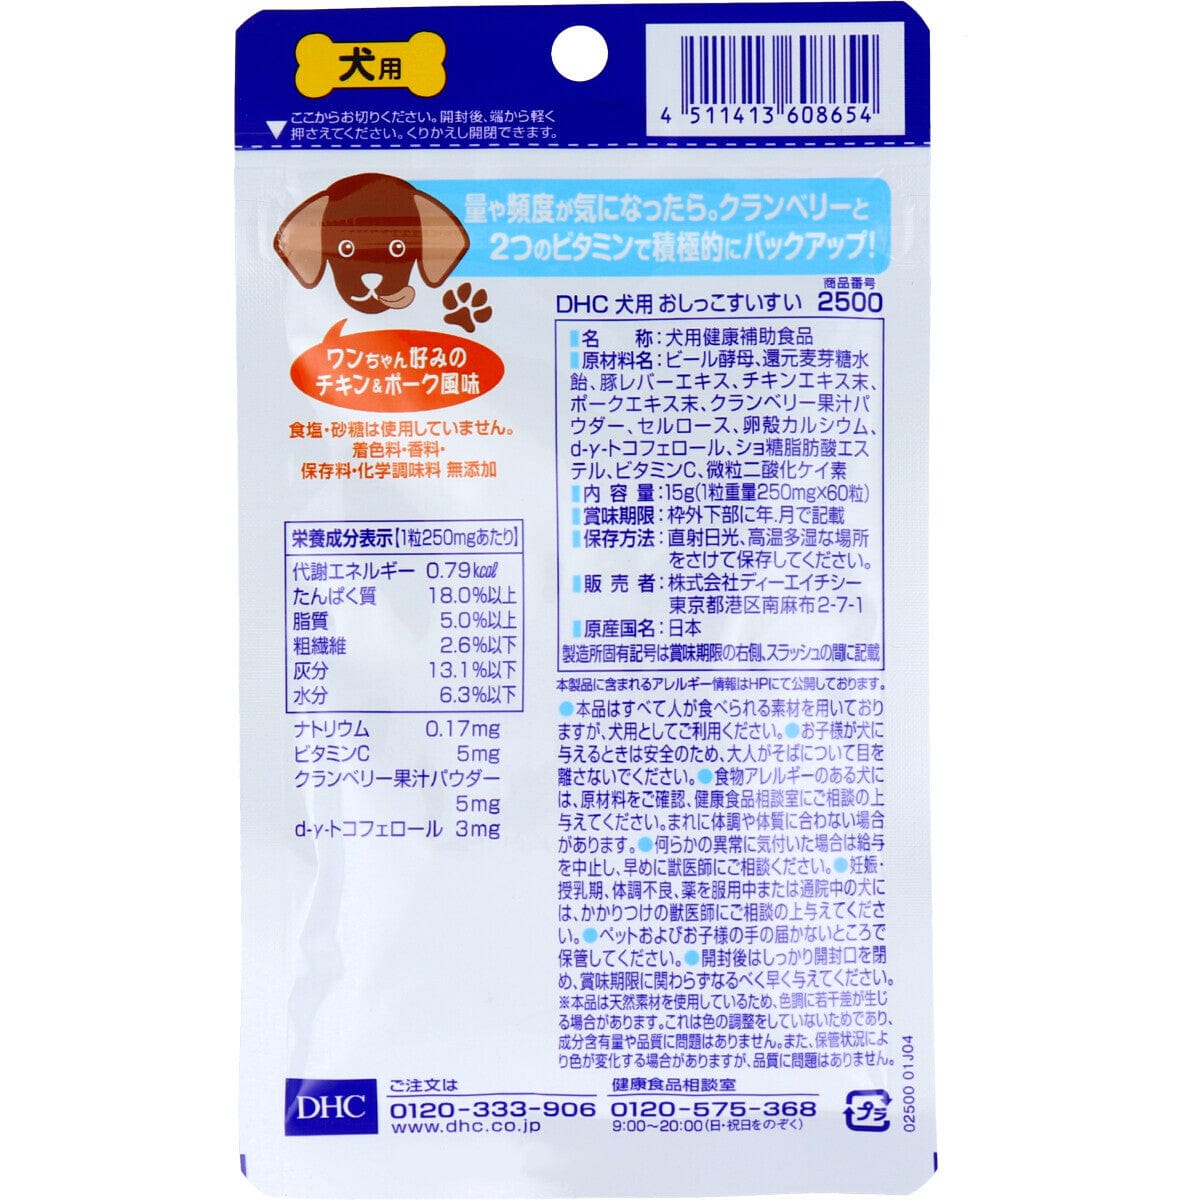 DHC - Urinal Tract SuiSui Health Food Supplement for Pet Dogs (60 Tablets)    Pet Dog Supplements